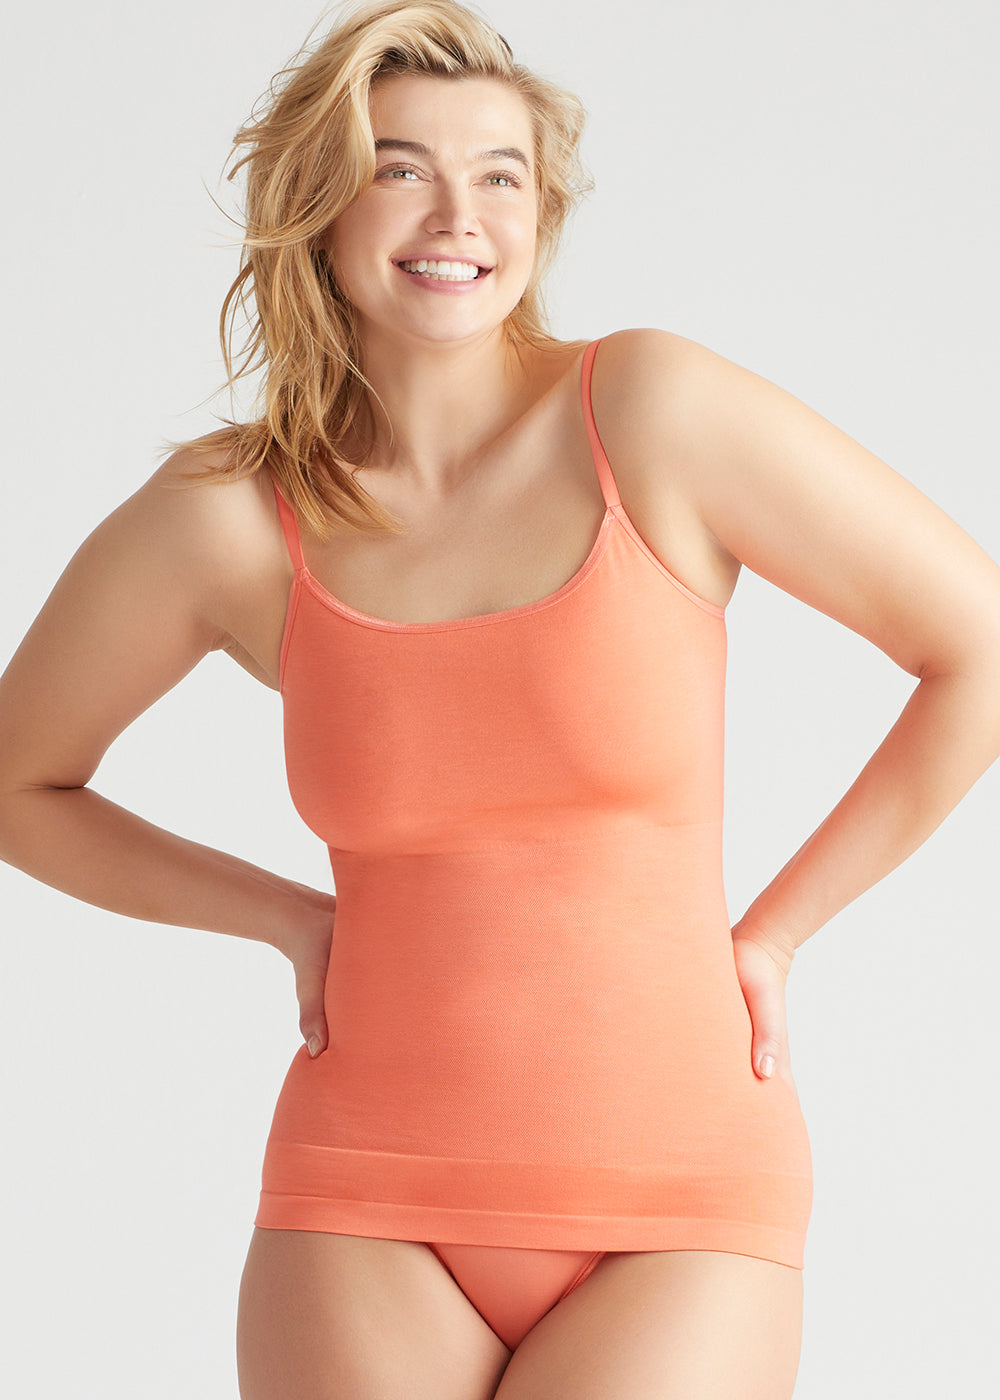 Convertible Shaping Camisole - Outlast® Seamless from Yummie in Peach Echo  - 1